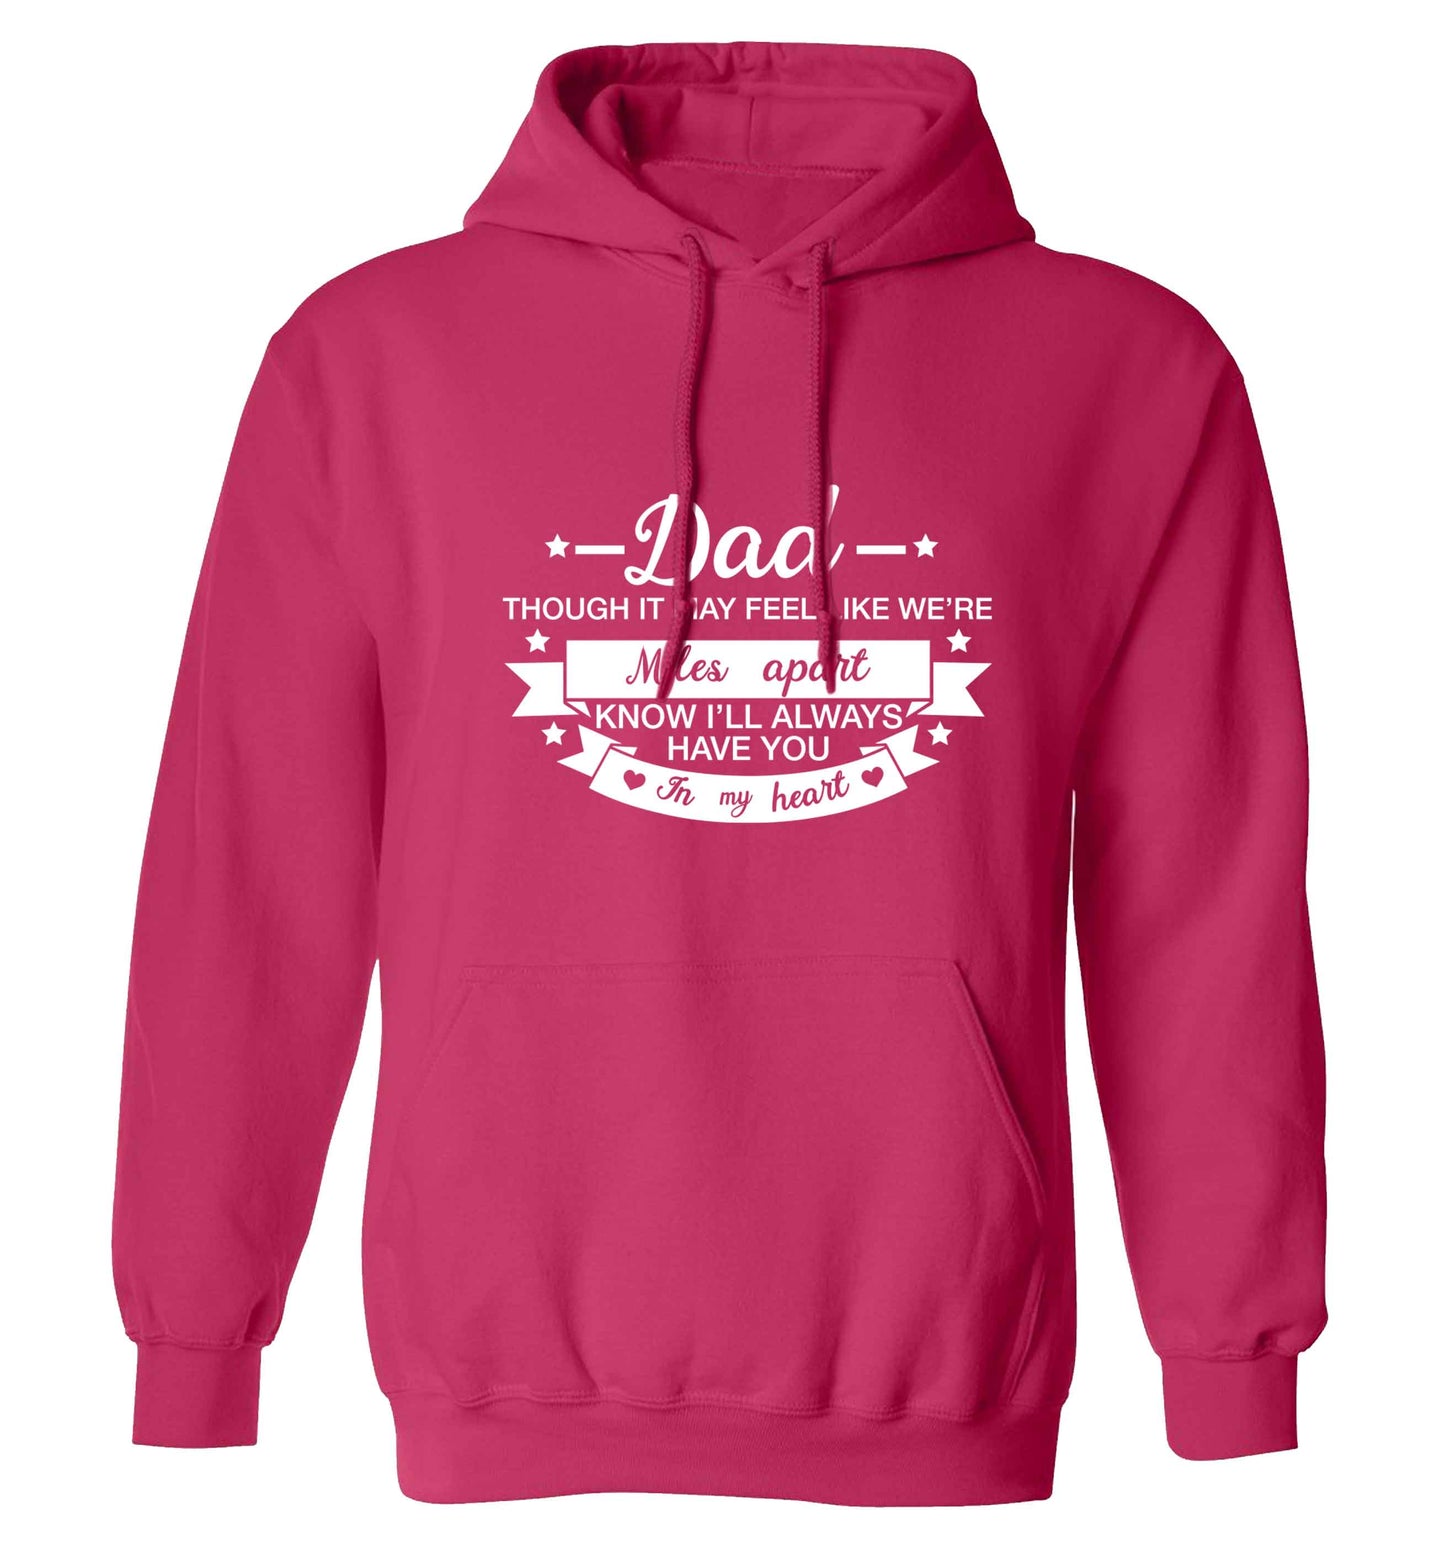 Dad though it may feel like we're miles apart know I'll always have you in my heart adults unisex pink hoodie 2XL